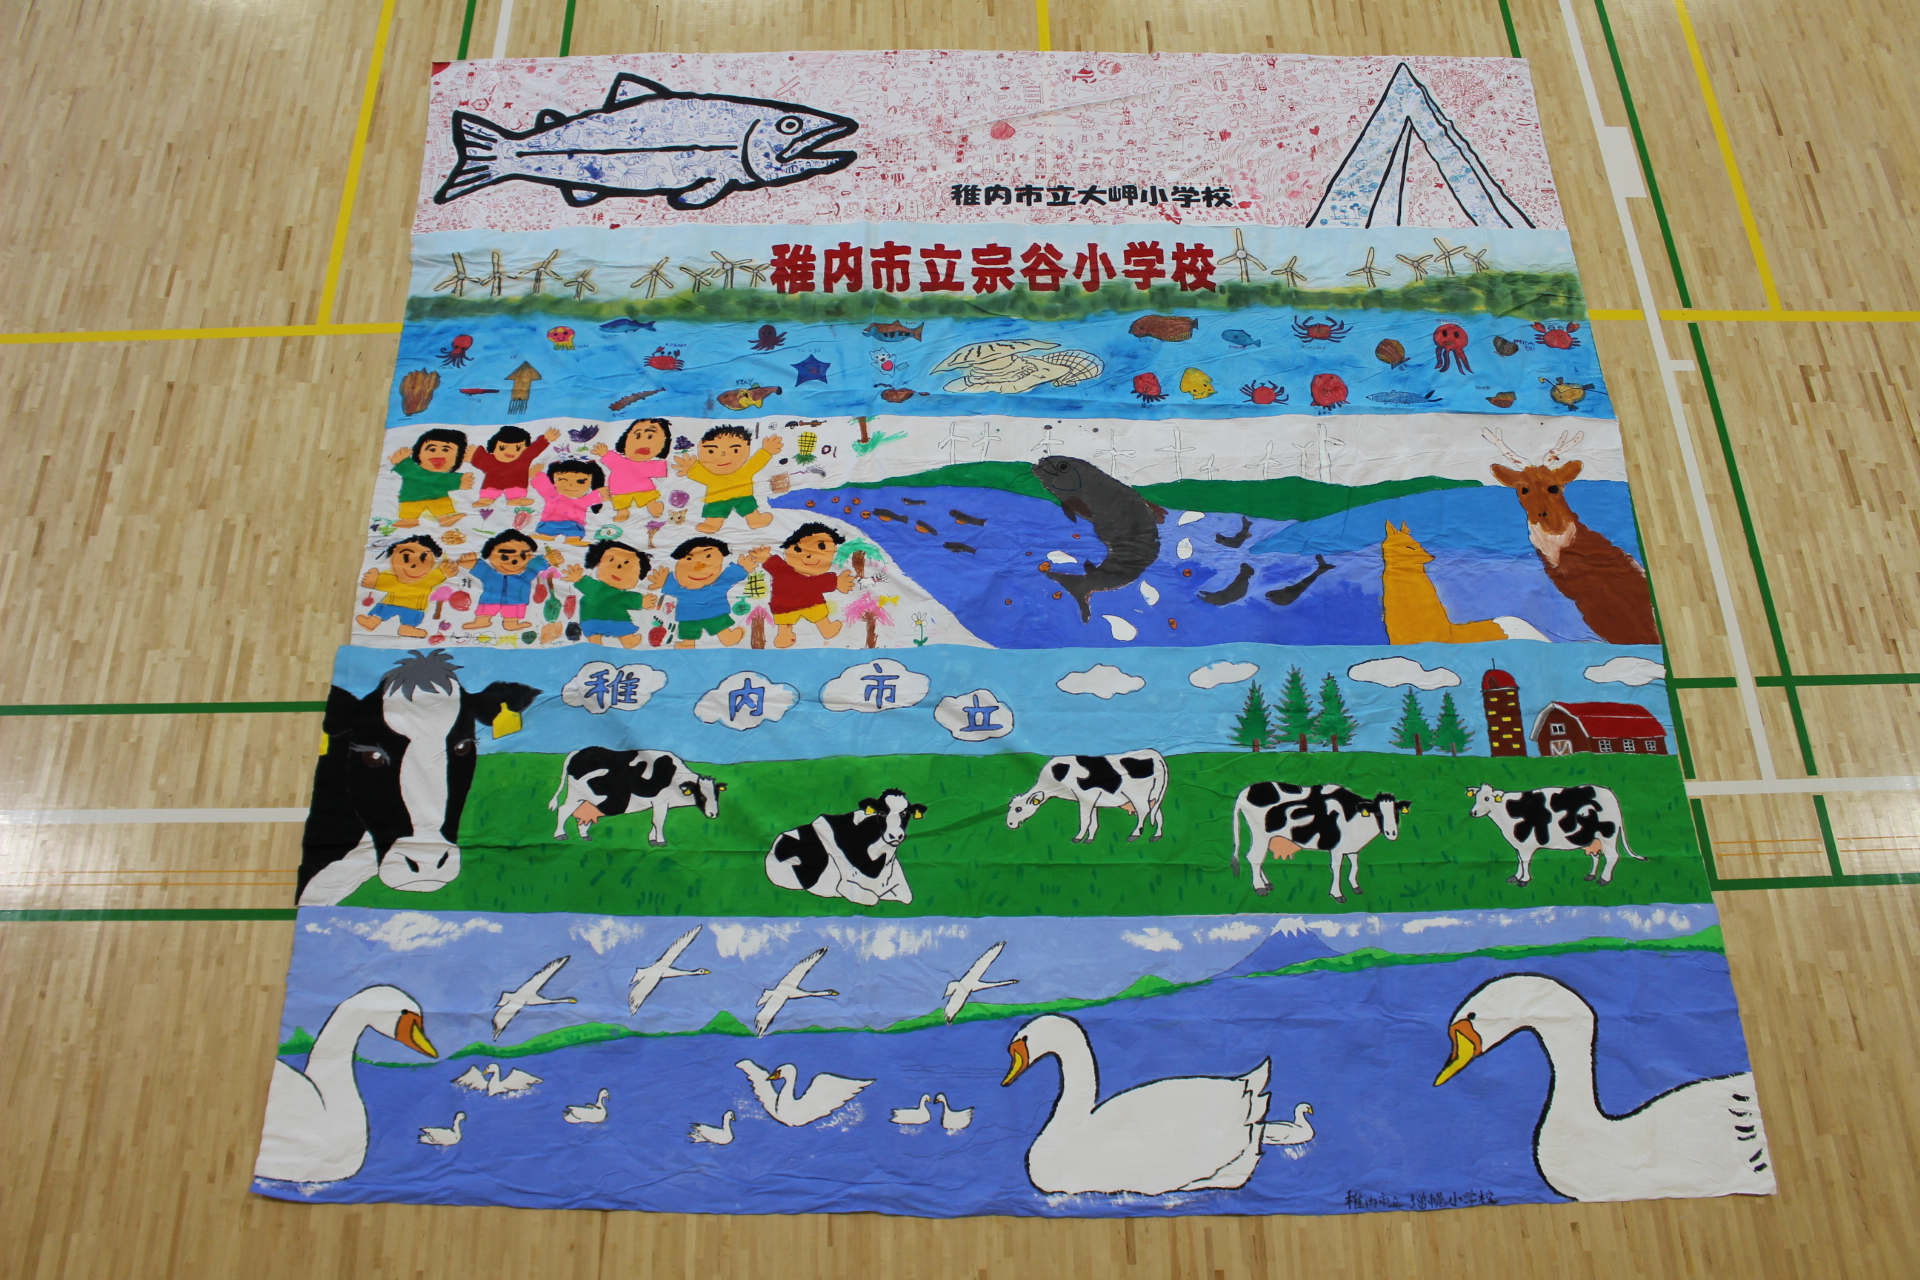 The Biggest Painting in the World 2020 Wakkanai city was completed.